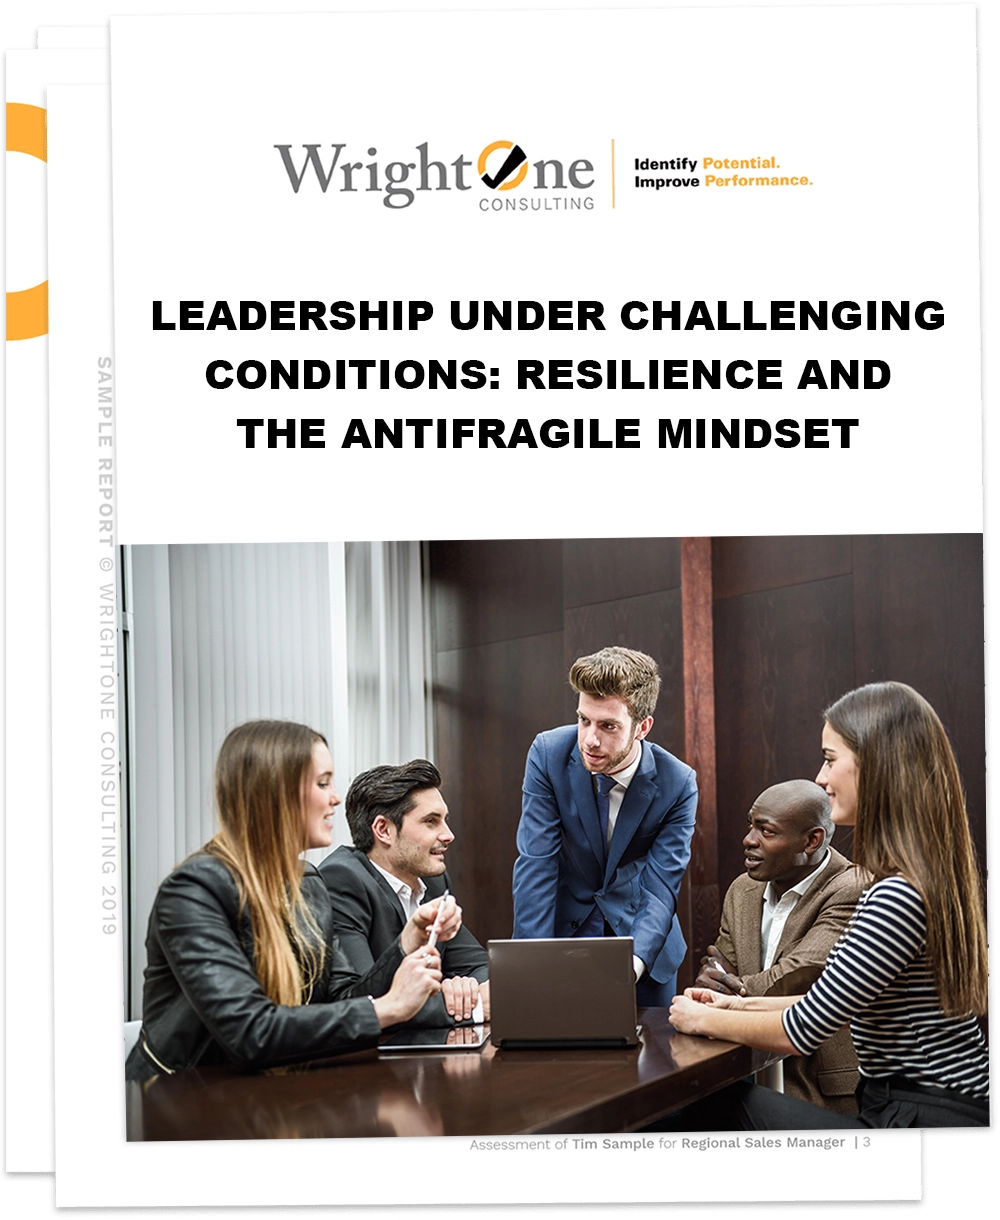 Leadership Under Challenging Conditions: Resilience and the Antifragile Mindset